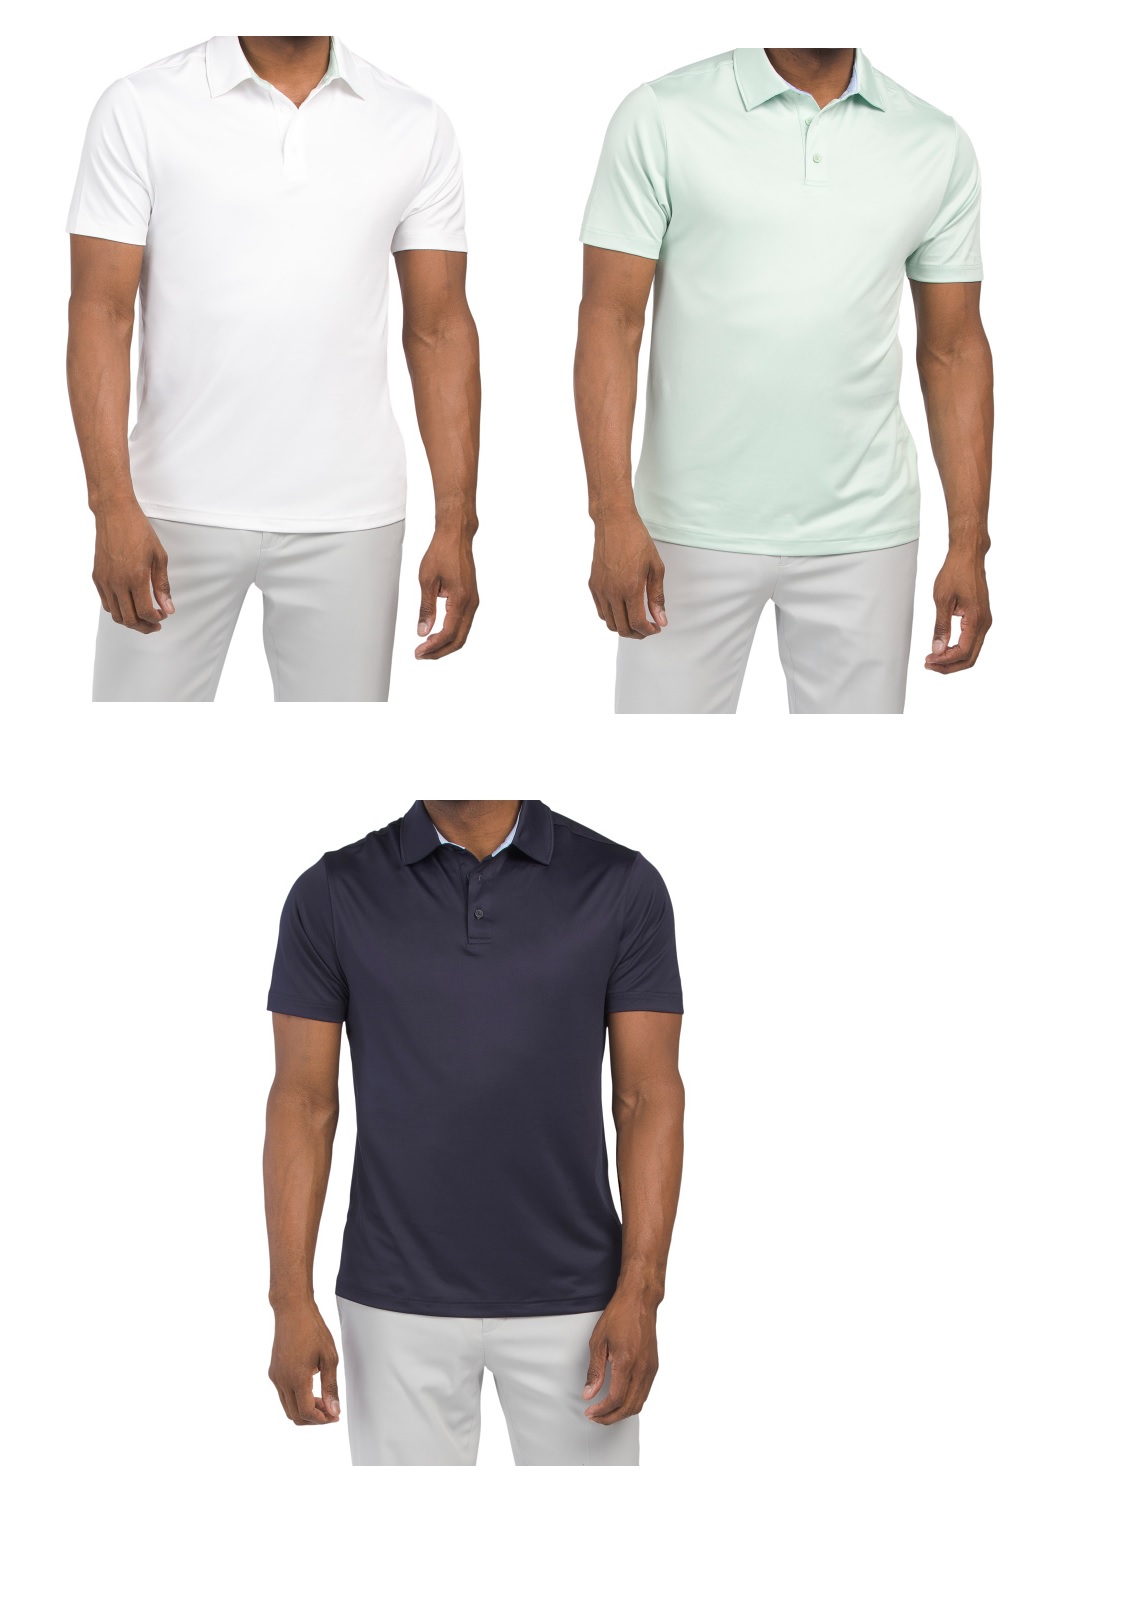 Sale on RORIE WHELAN Solid Golf Polo